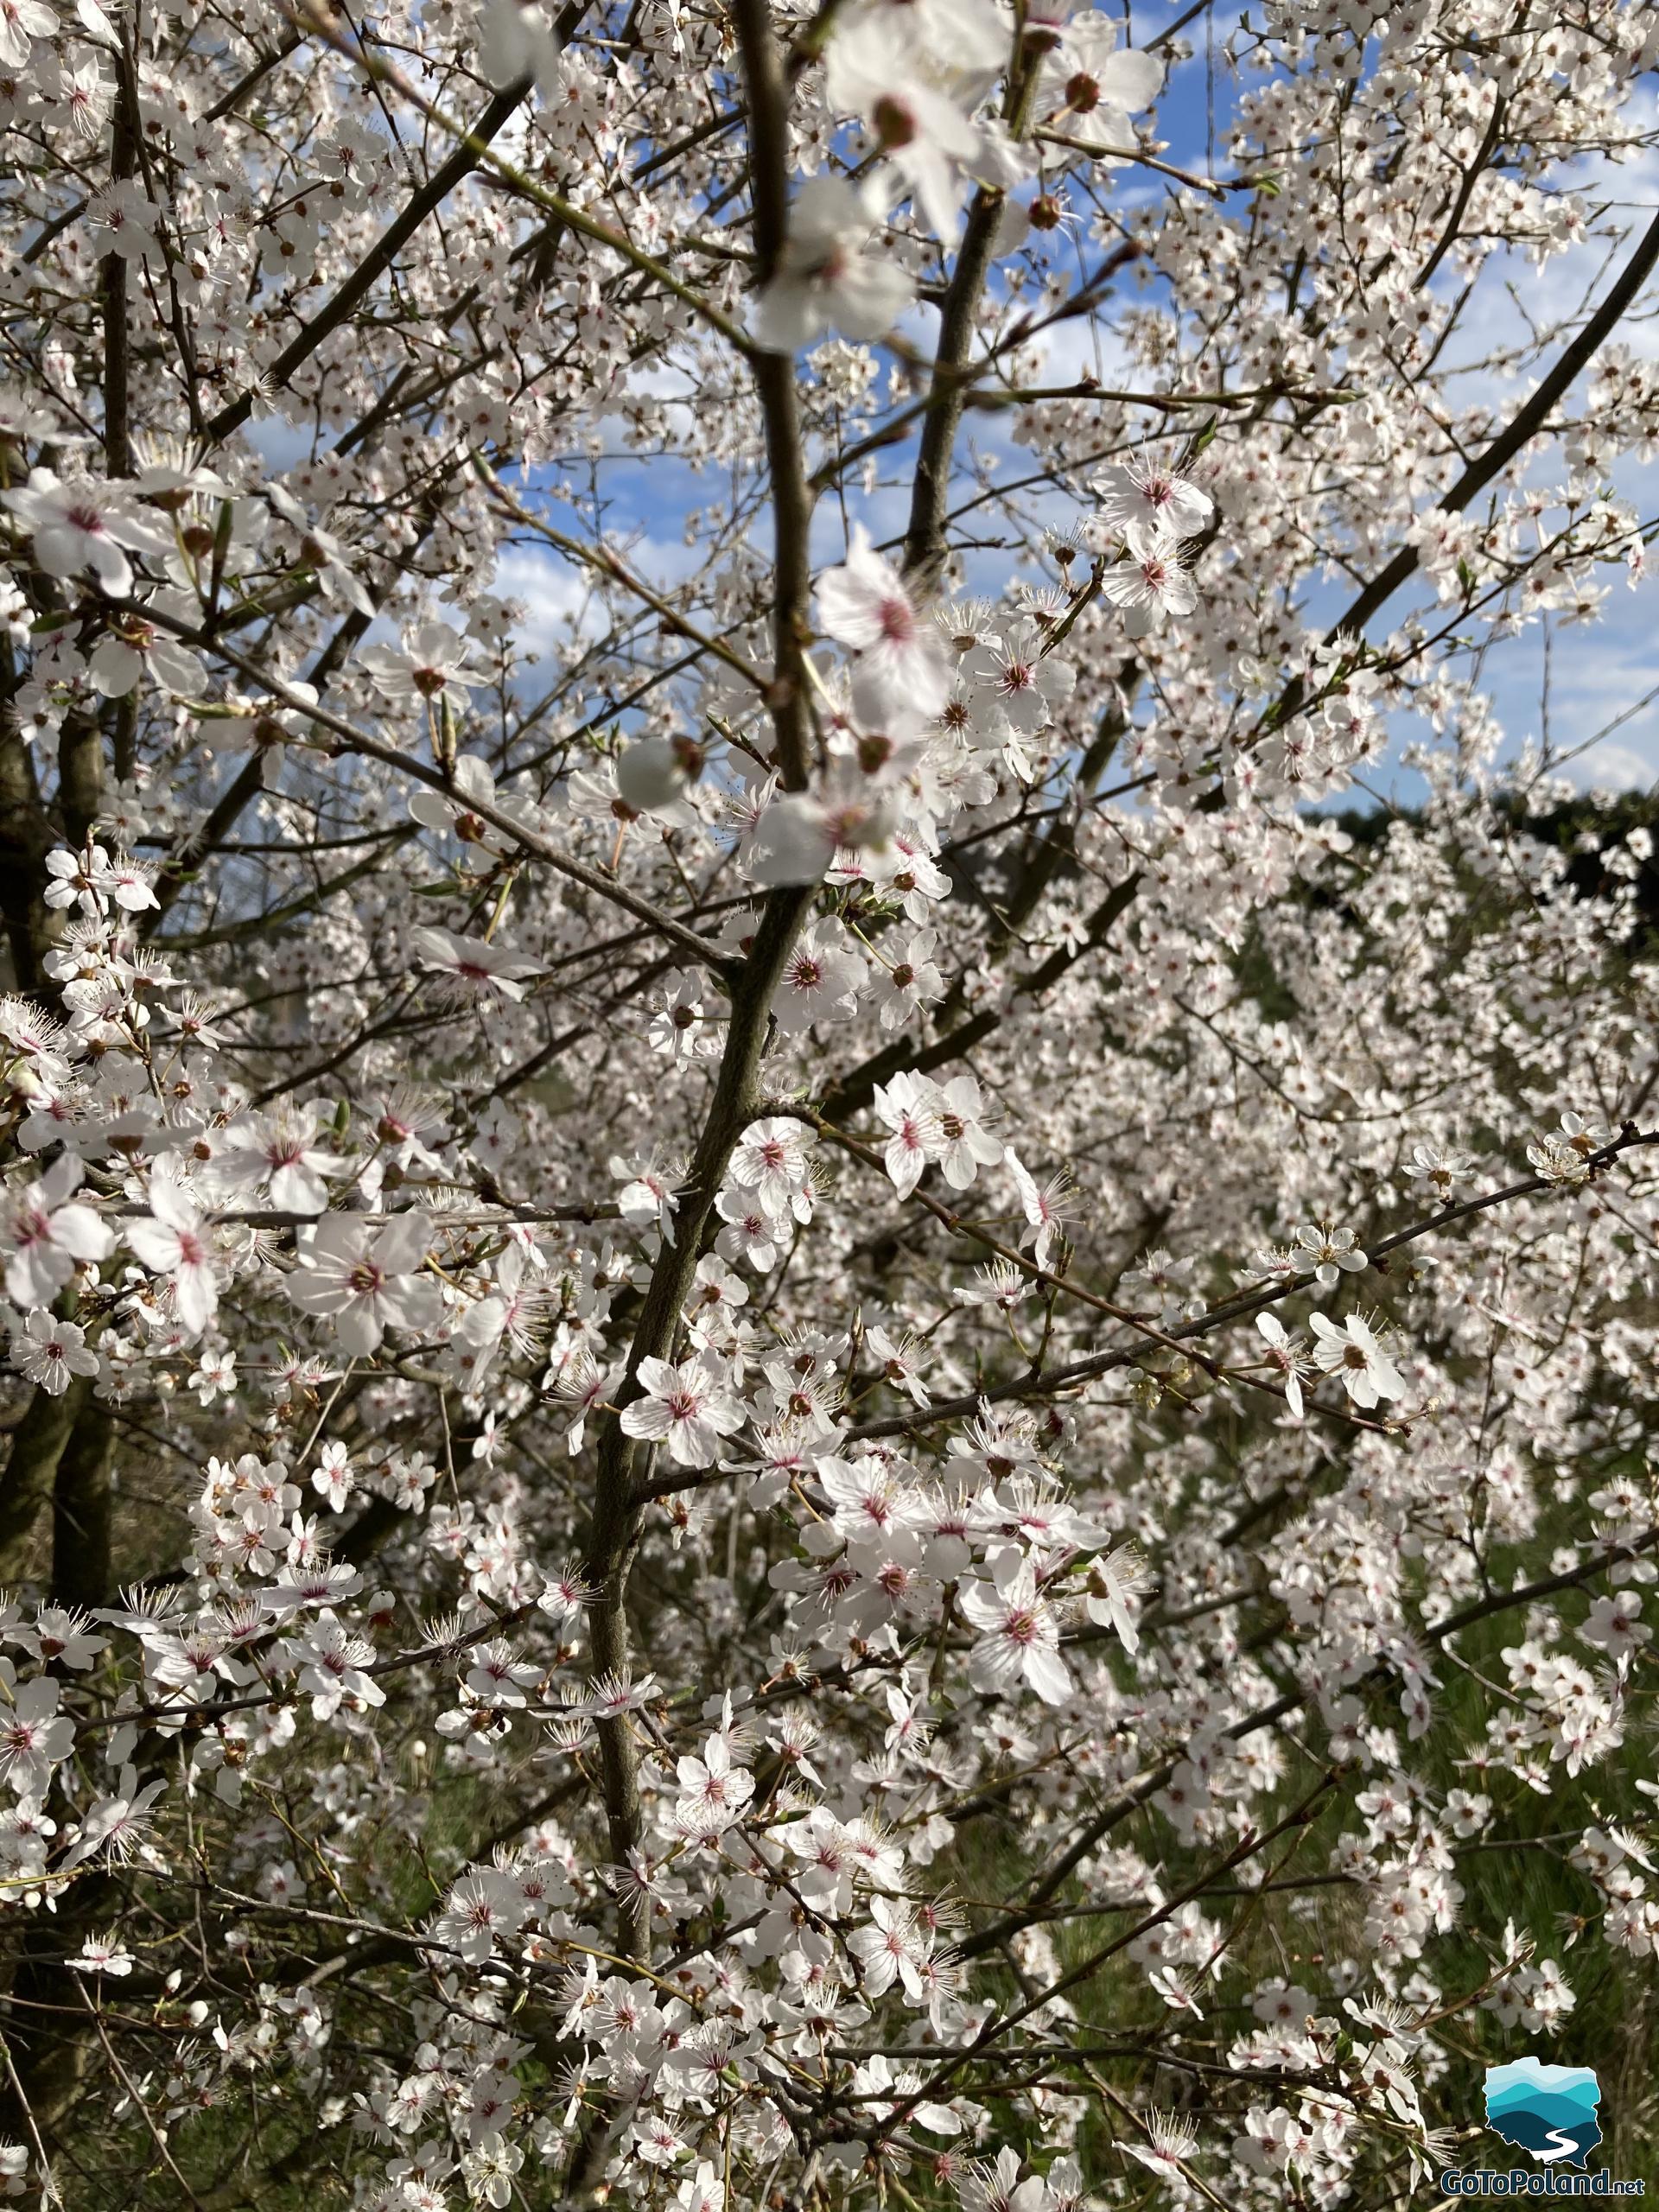 Blooming apple tree with lots of small, white flowers